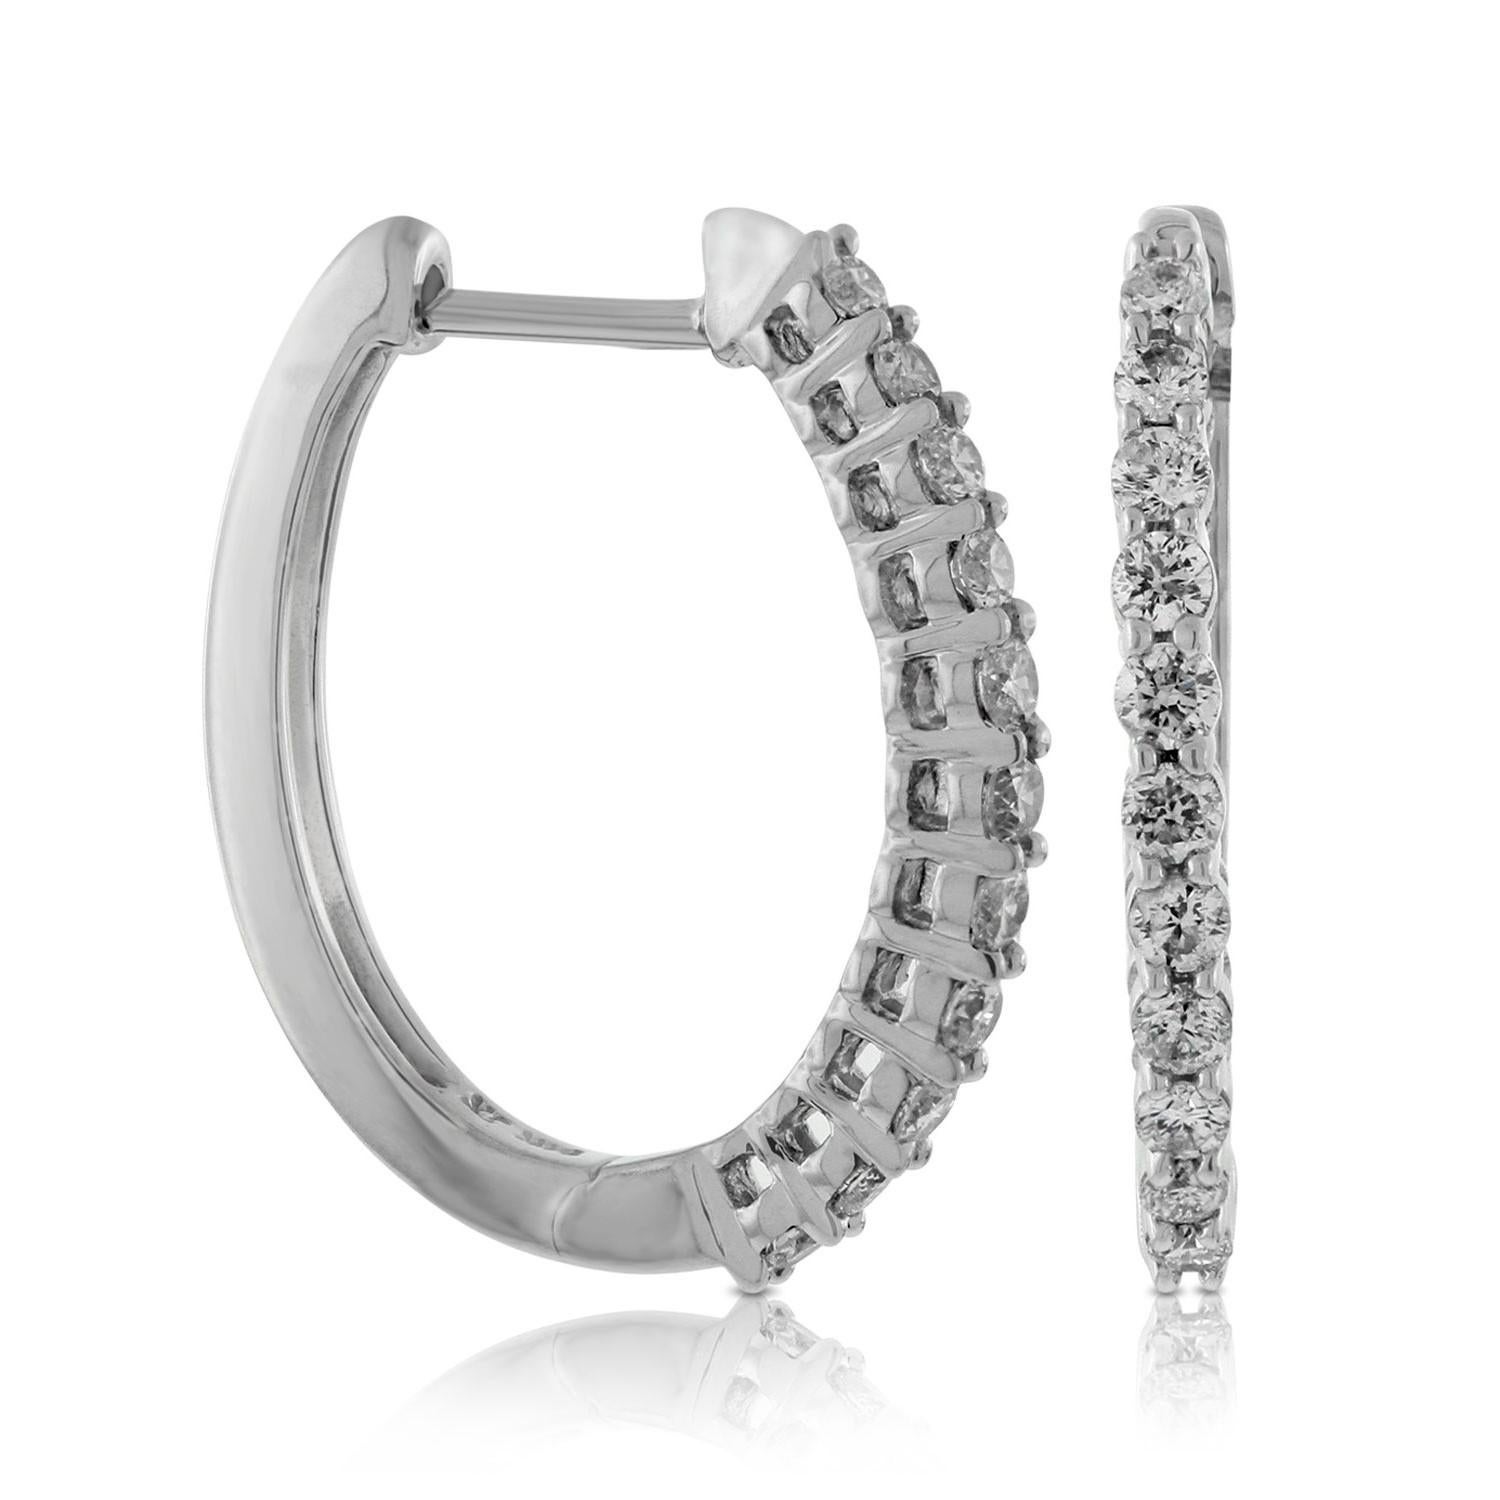 Contemporary 1.00 Carat Total Weight Diamond Outside Round Hoop Earrings in 14 Karat Gold			 For Sale